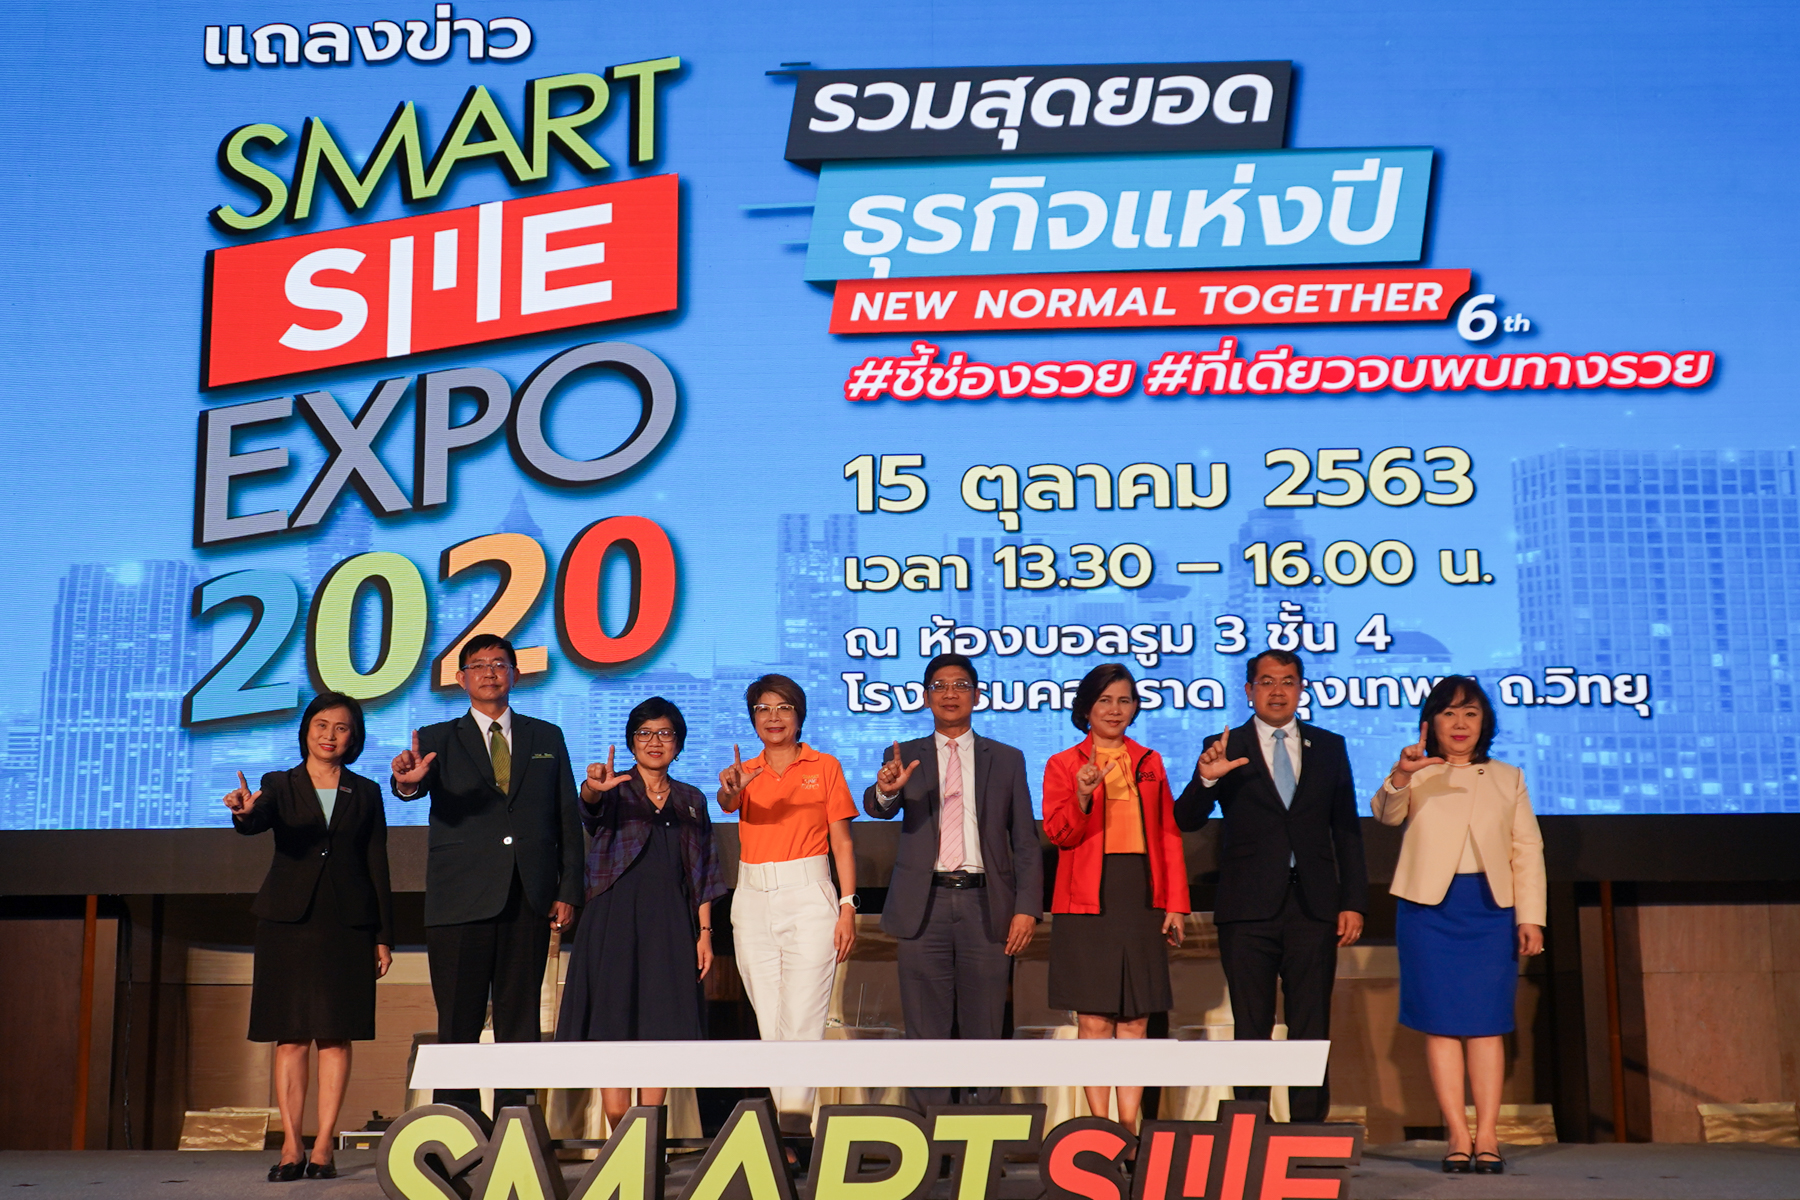 EXIM Thailand Joins Smart SME Expo 2020 Press Conference